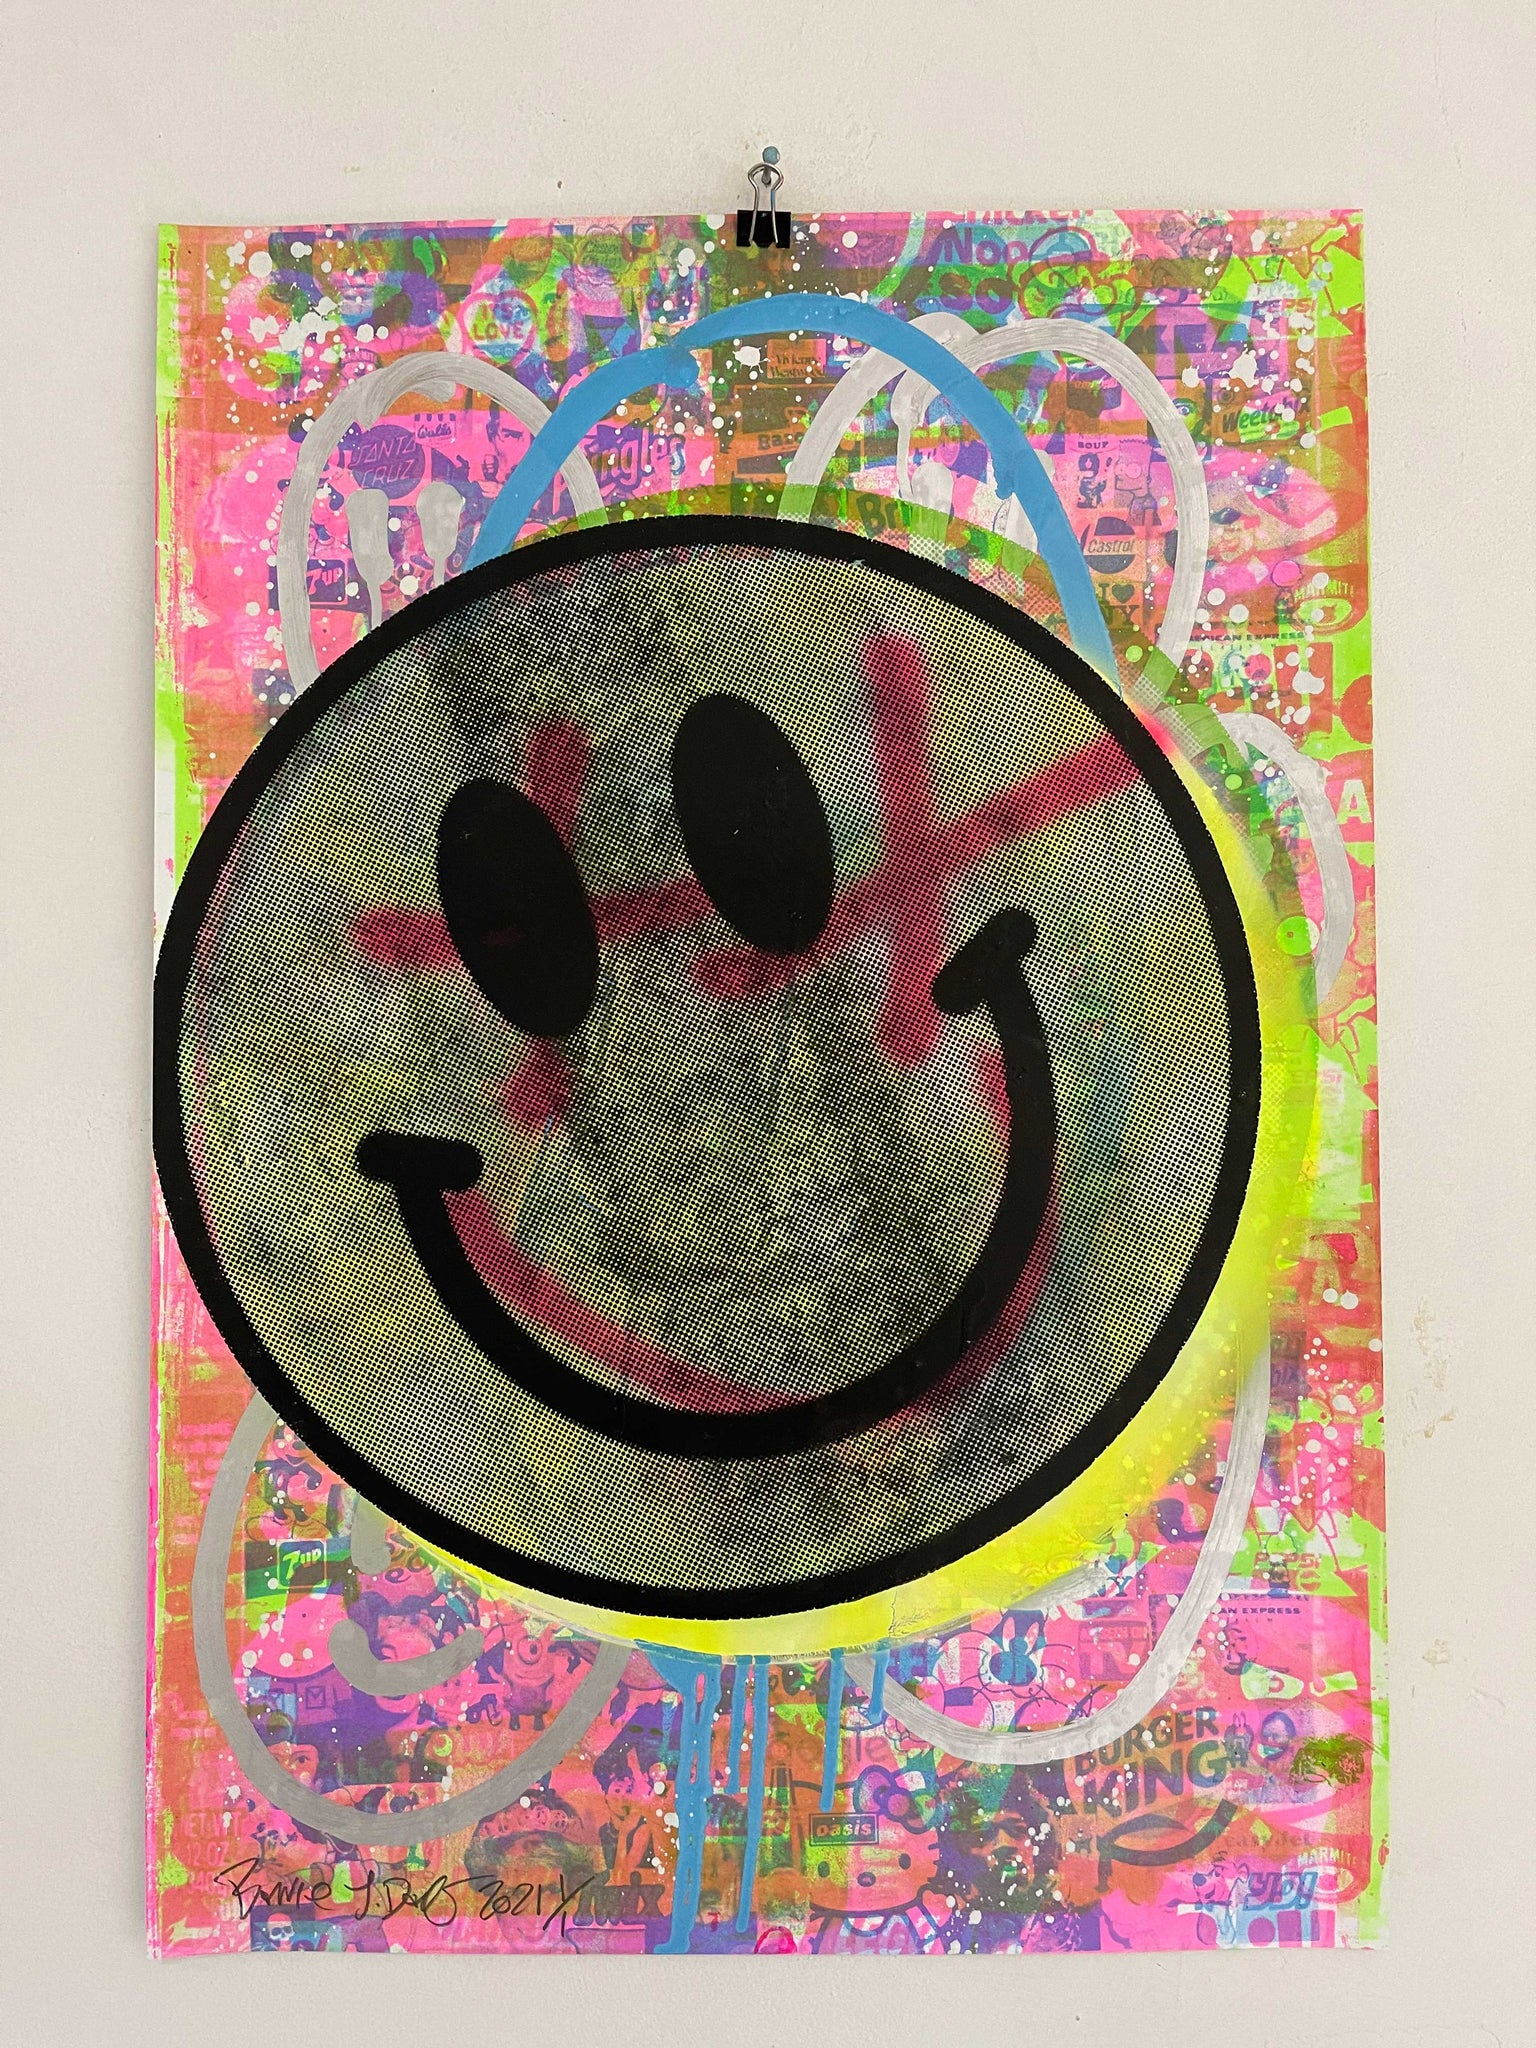 Smiley Happy Now Print, unframed Silkscreen print on paper (hand finished) edition of 1/1 - A2 size 42cm x 59.4cm. Buy online with free delivery worldwide.